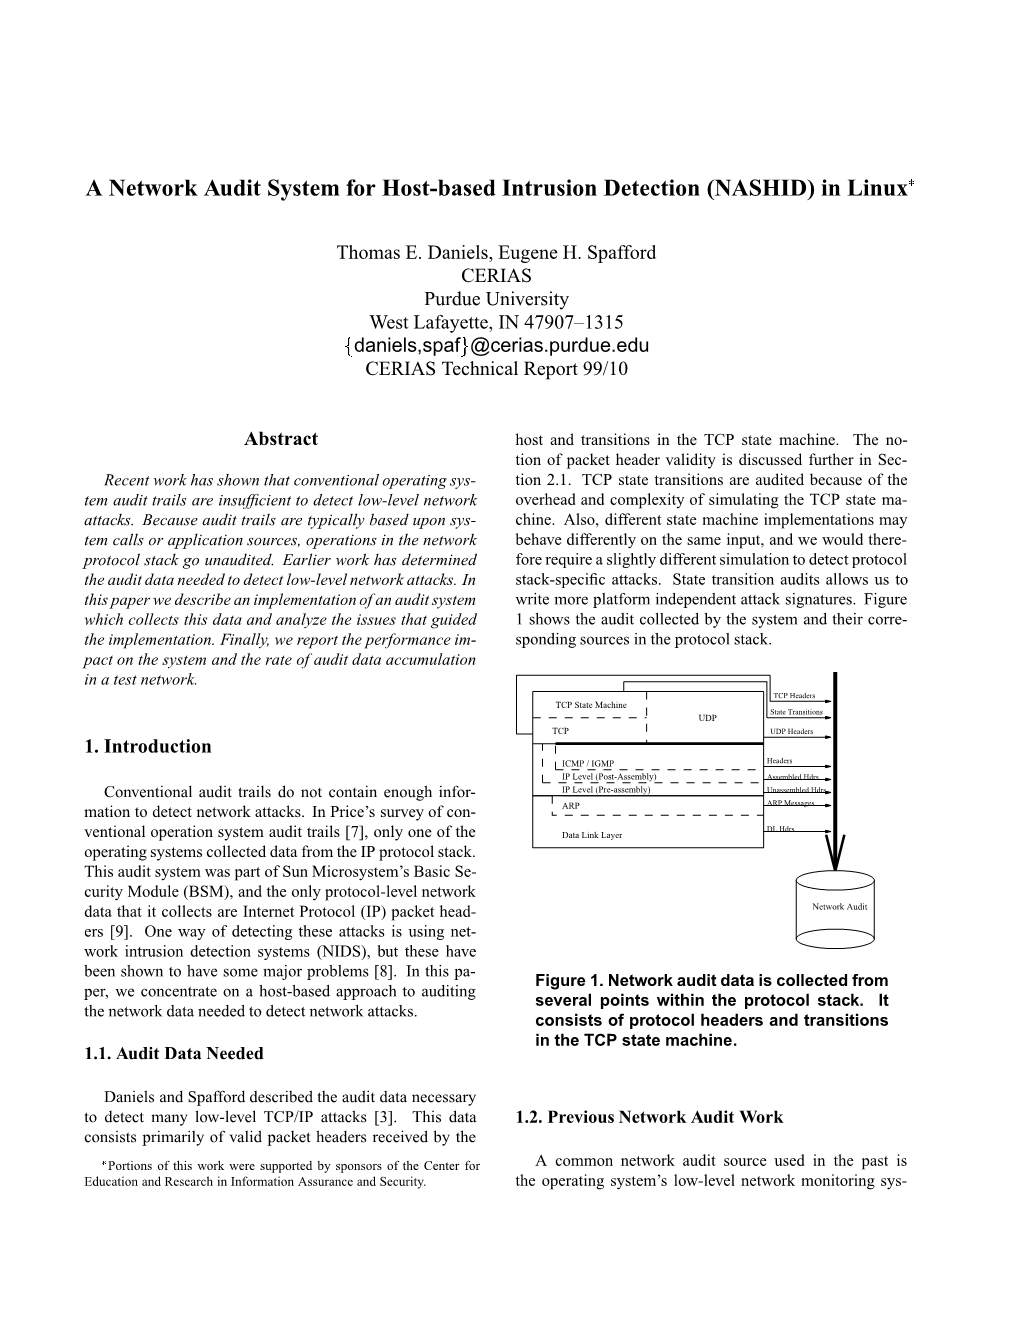 A Network Audit System for Host-Based Intrusion Detection (NASHID) in Linux£